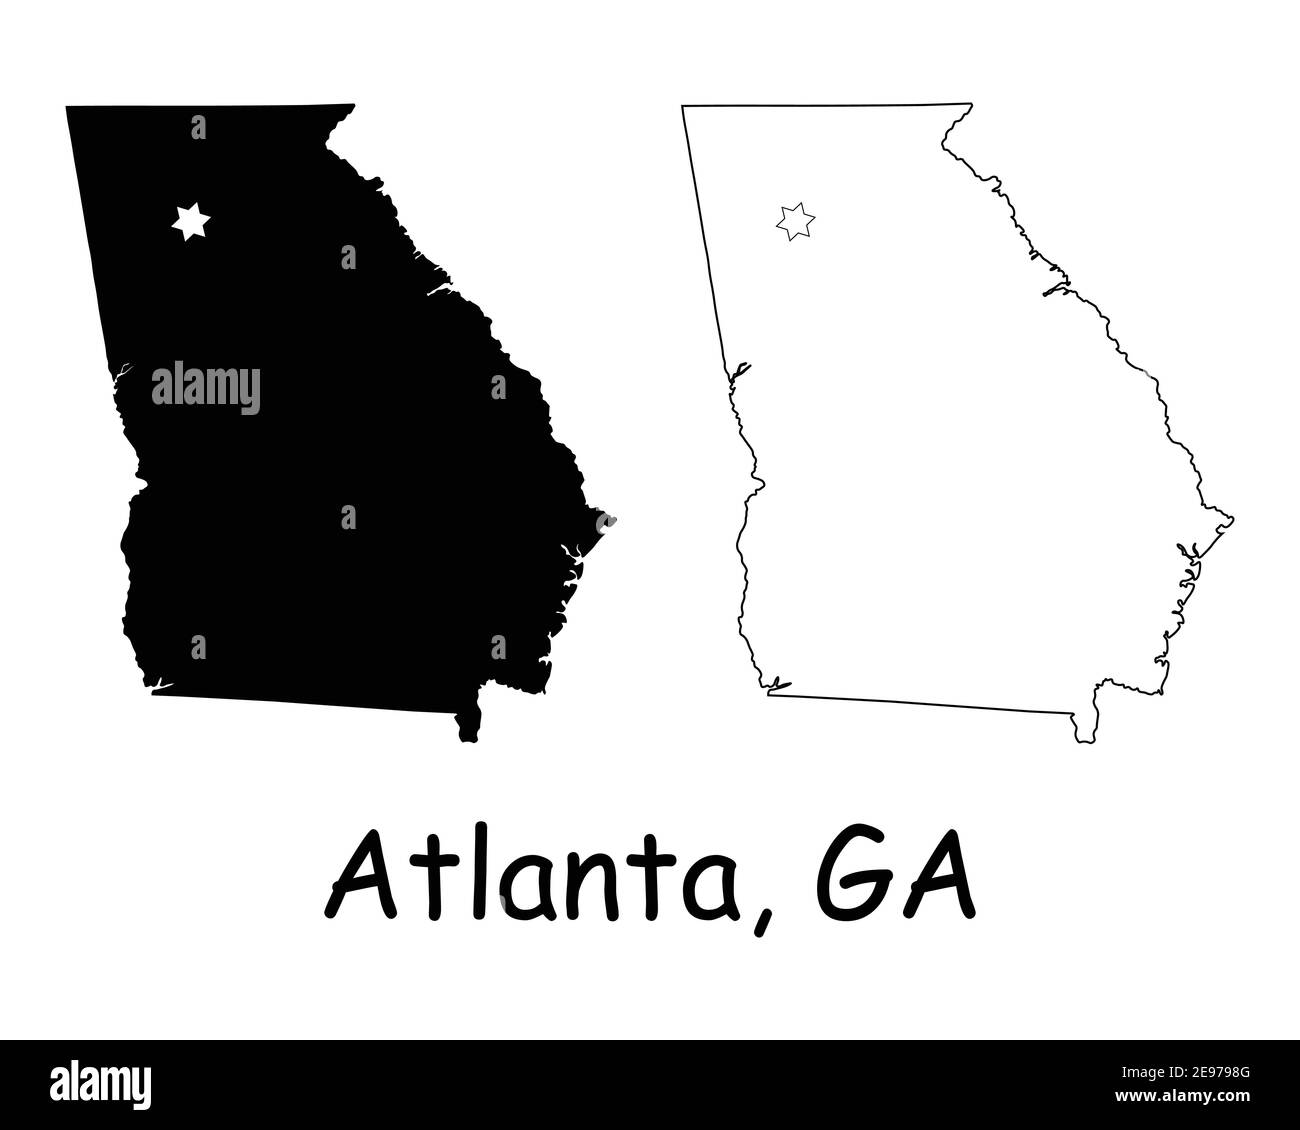 Georgia GA state Map USA with Capital City Star at Atlanta. Black silhouette and outline isolated on a white background. EPS Vector Stock Vector